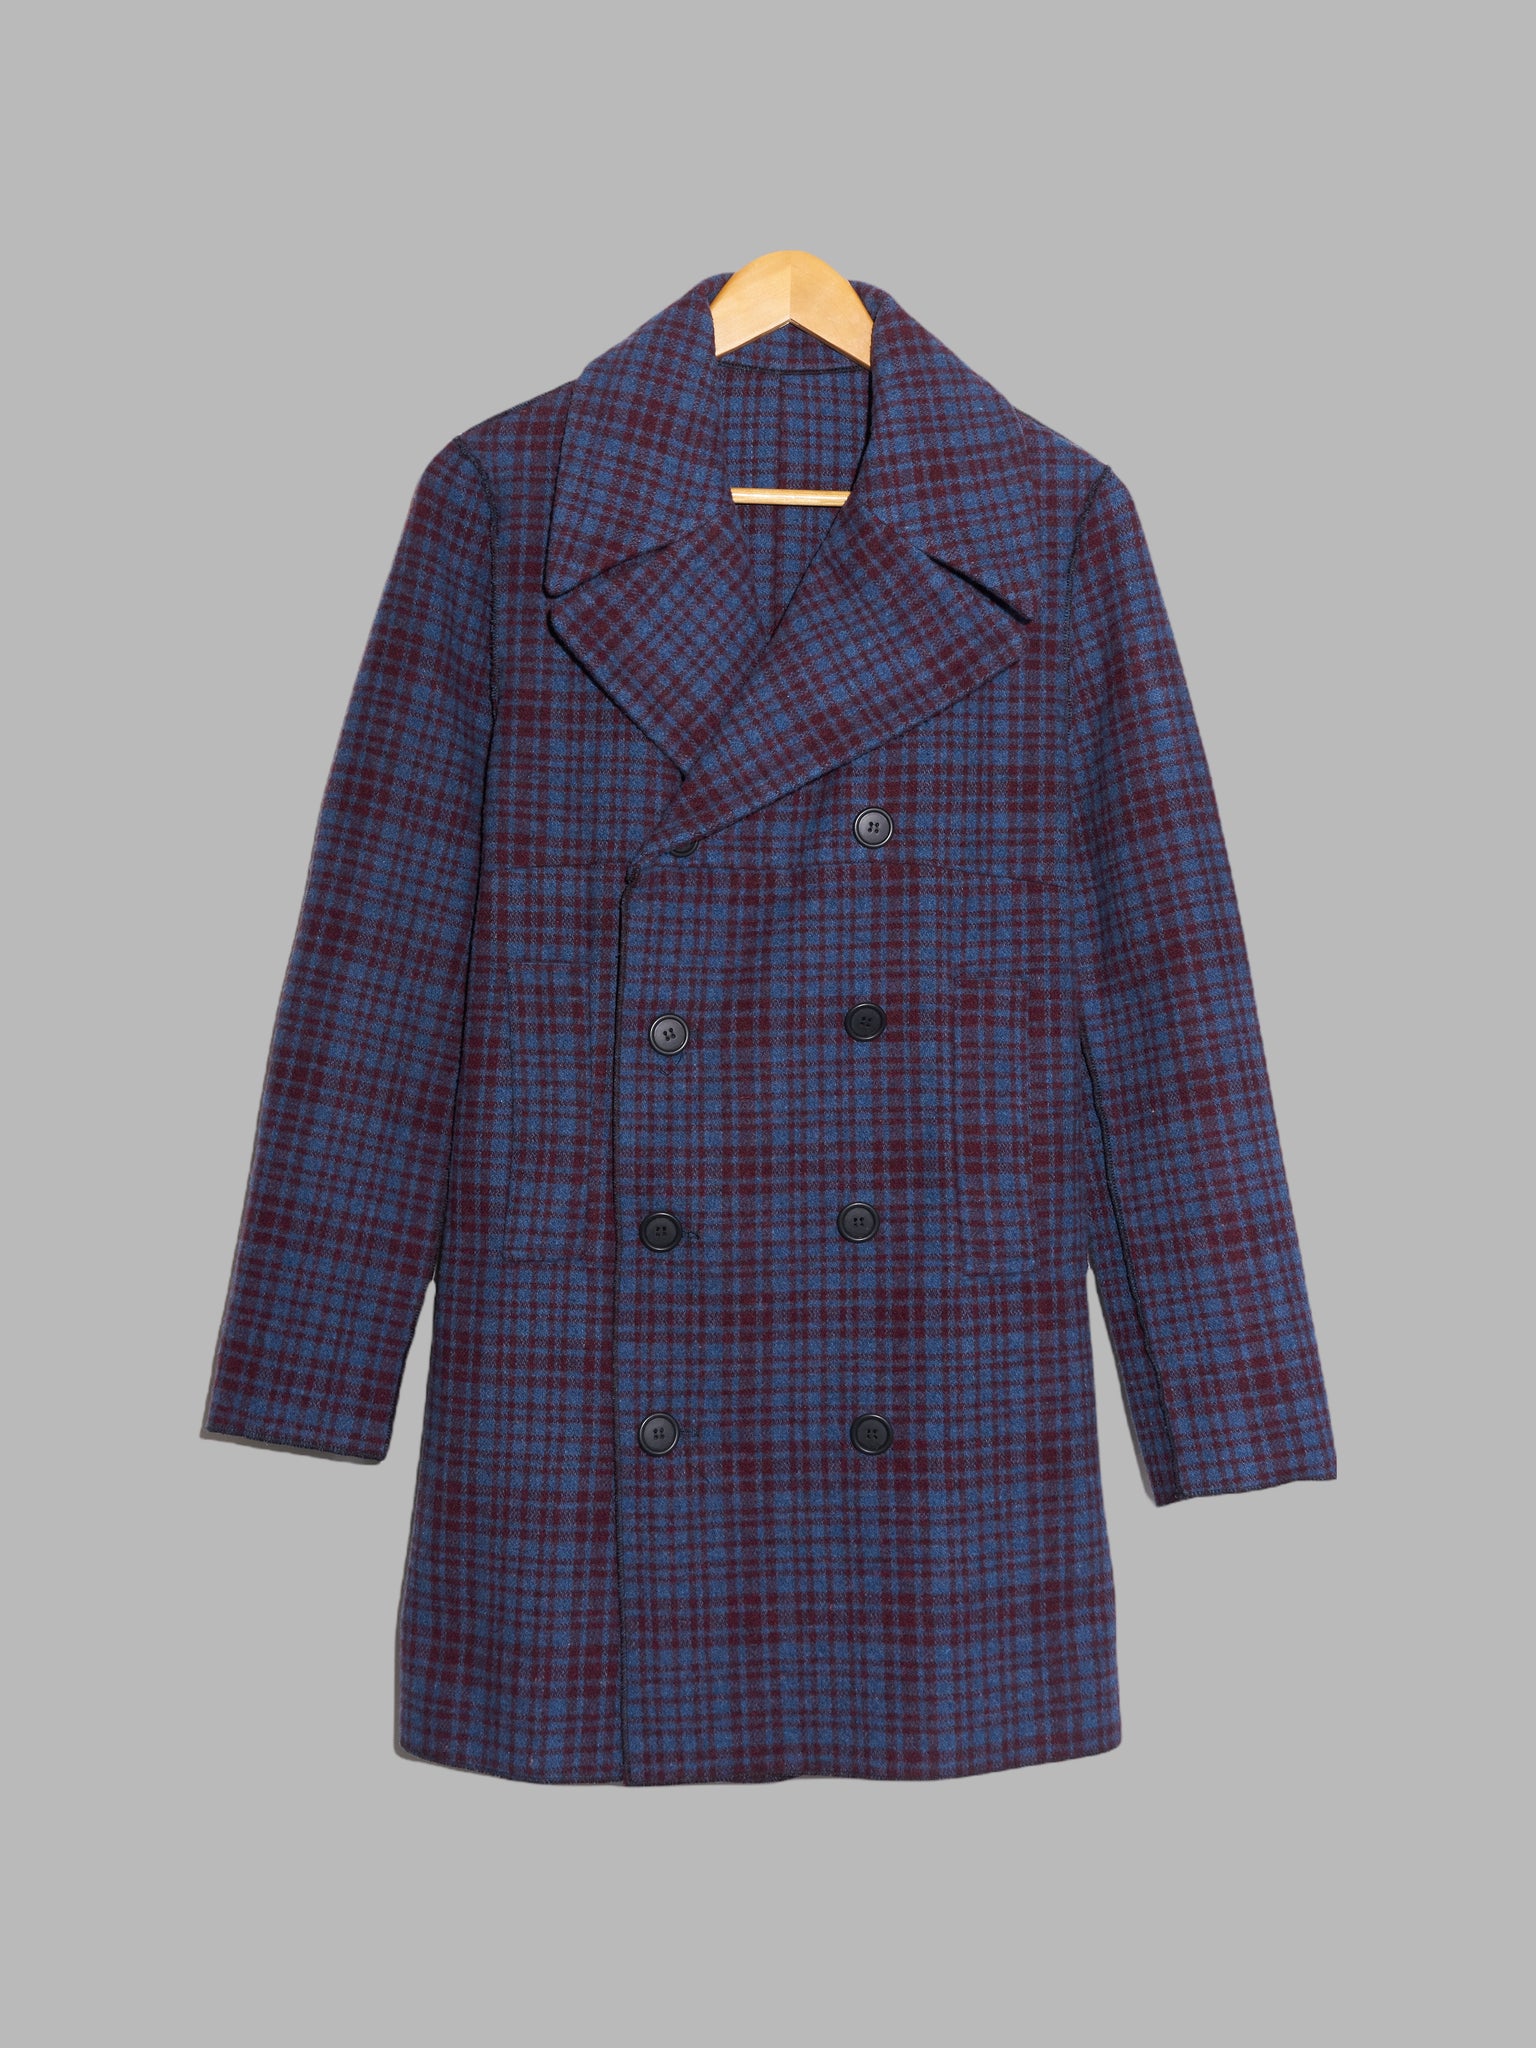 Jean Colonna purple blue check knit pea coat with overlocked edges - S